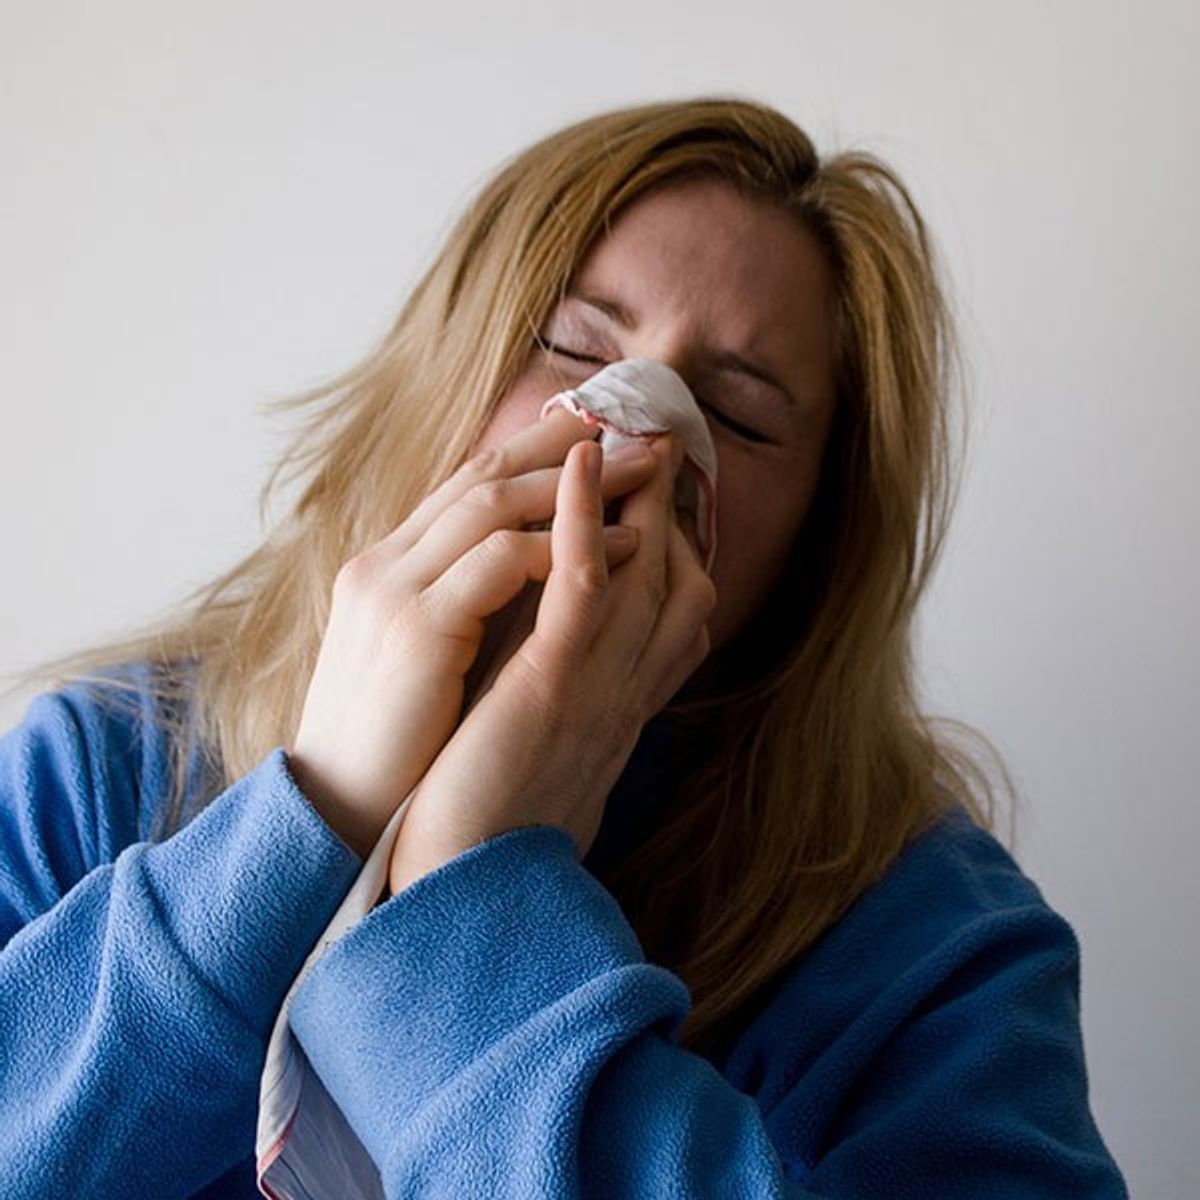 8 Remedies For The Common College Cold